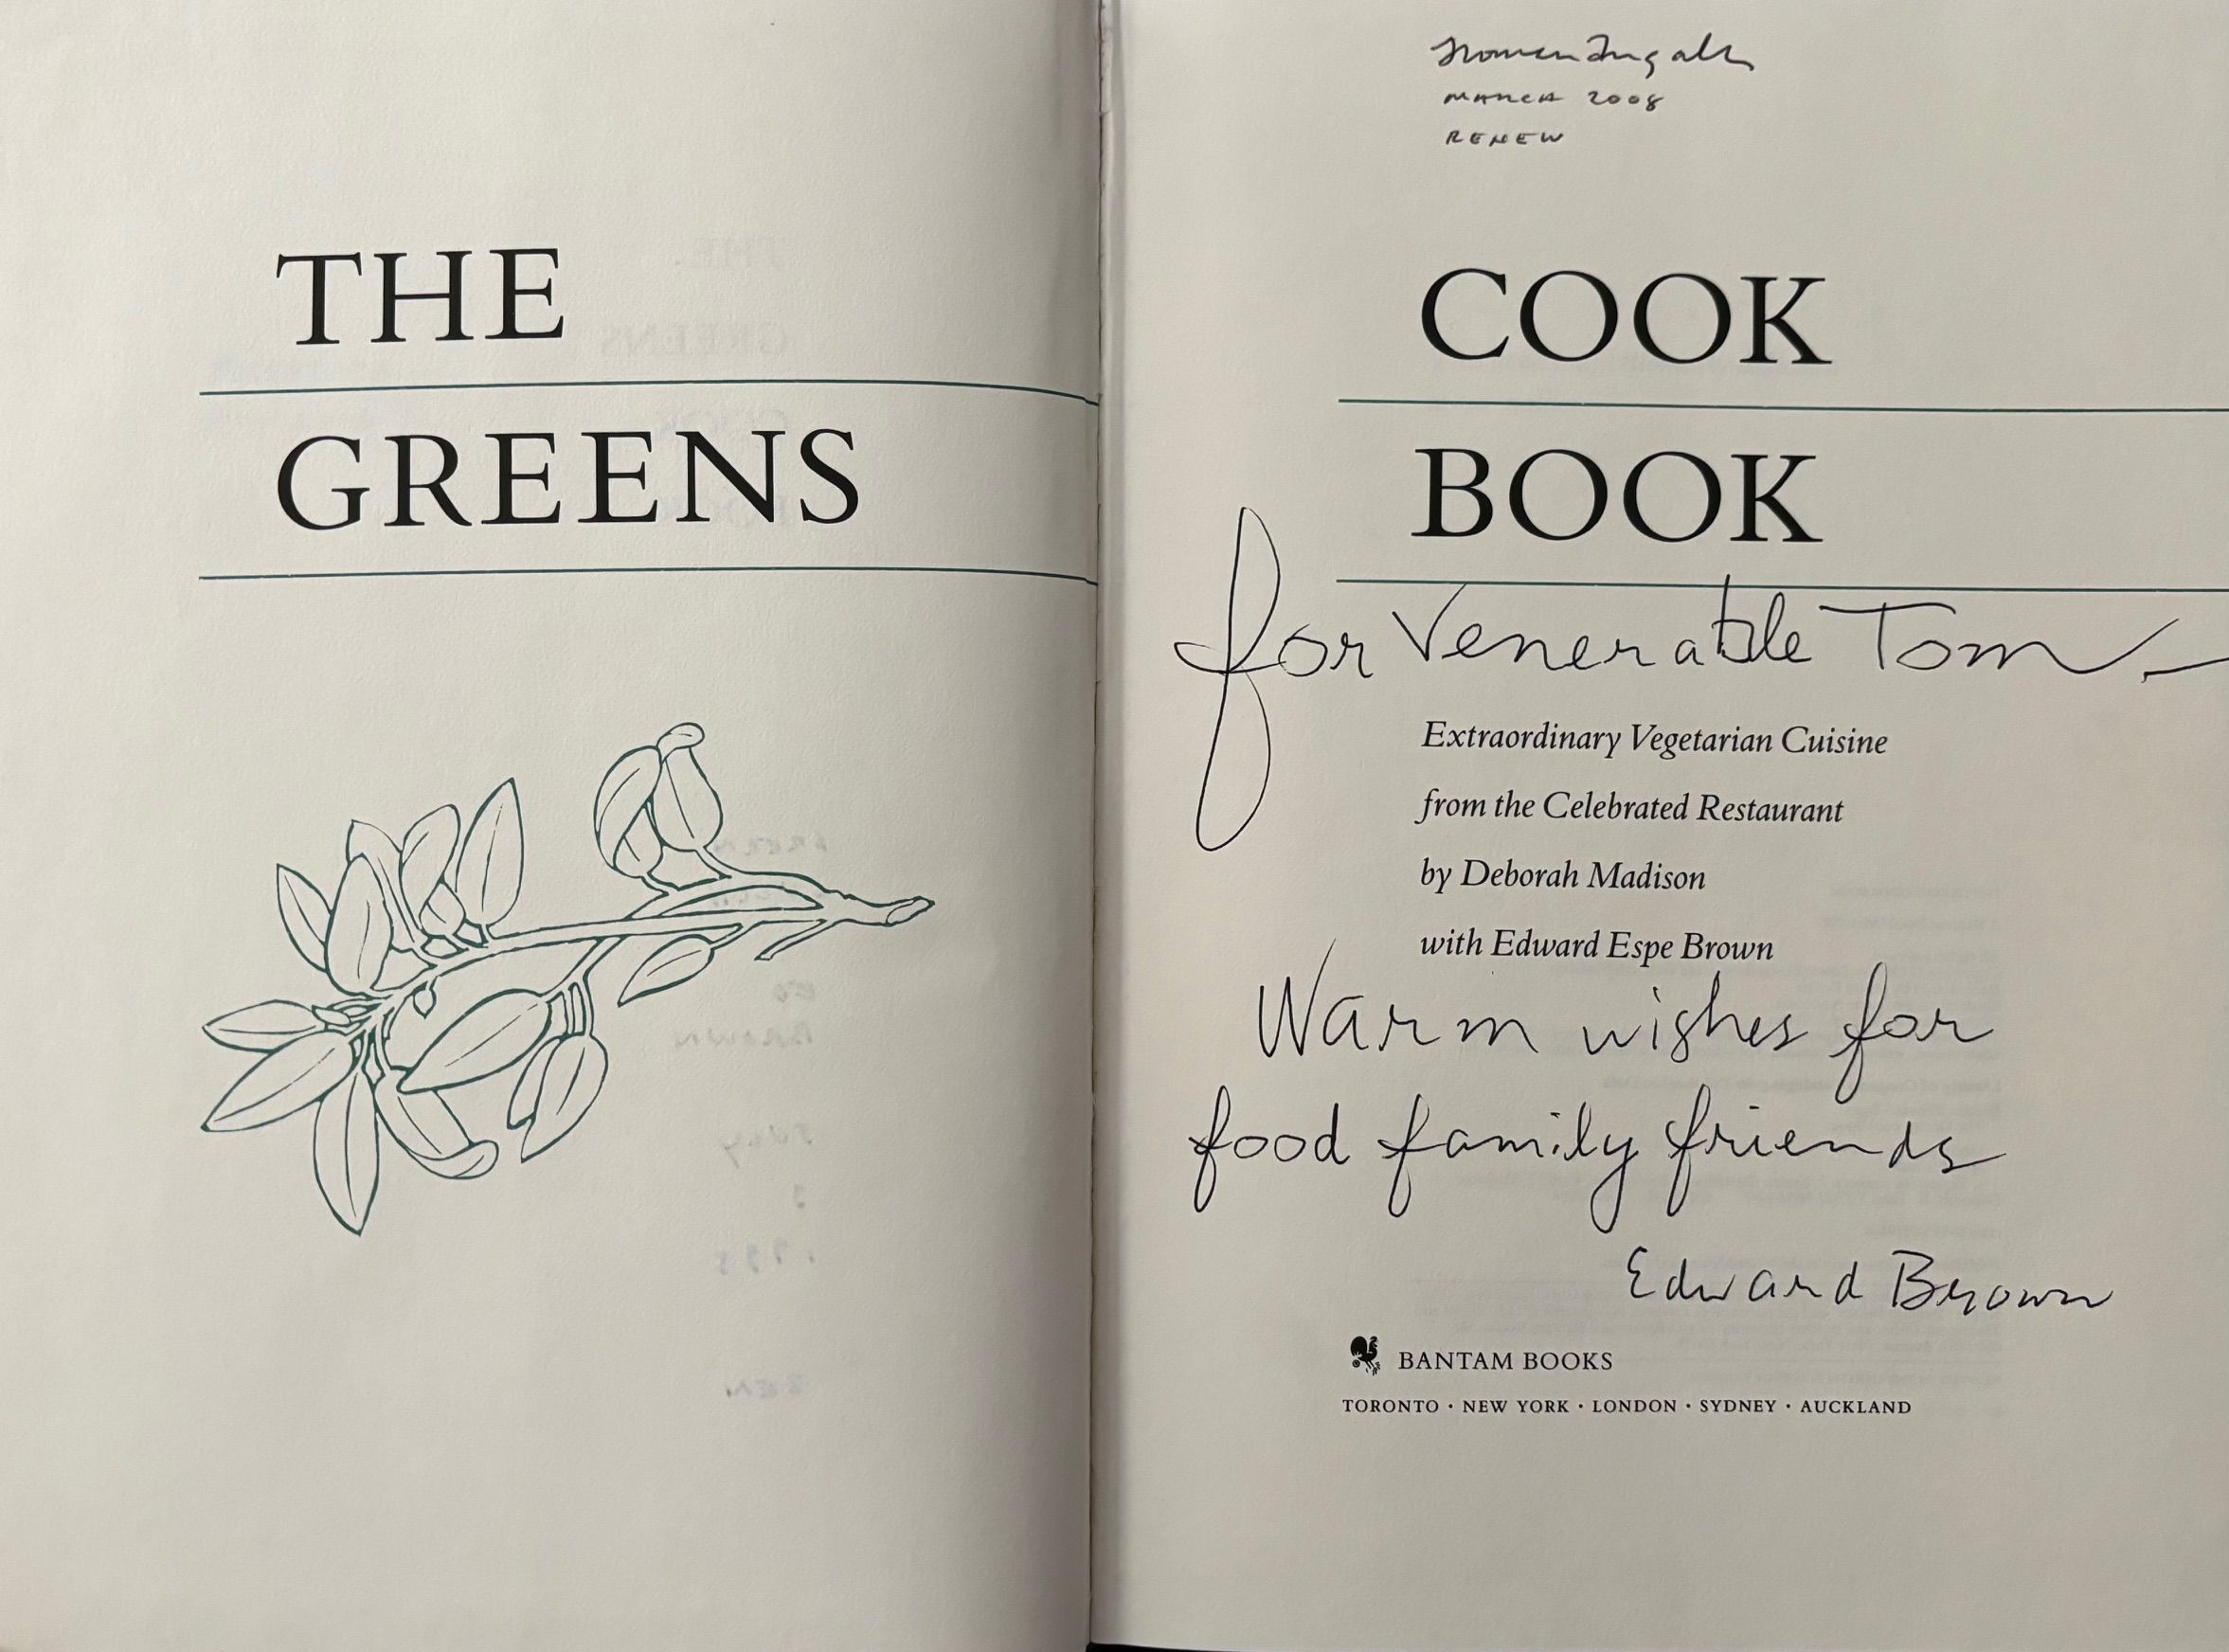 (*NEW ARRIVAL*) Deborah Madison & Edward Espe Brown. The Greens Cookbook: Extraordinary Vegetarian Cuisine from the Celebrated Restaurant *SIGNED*